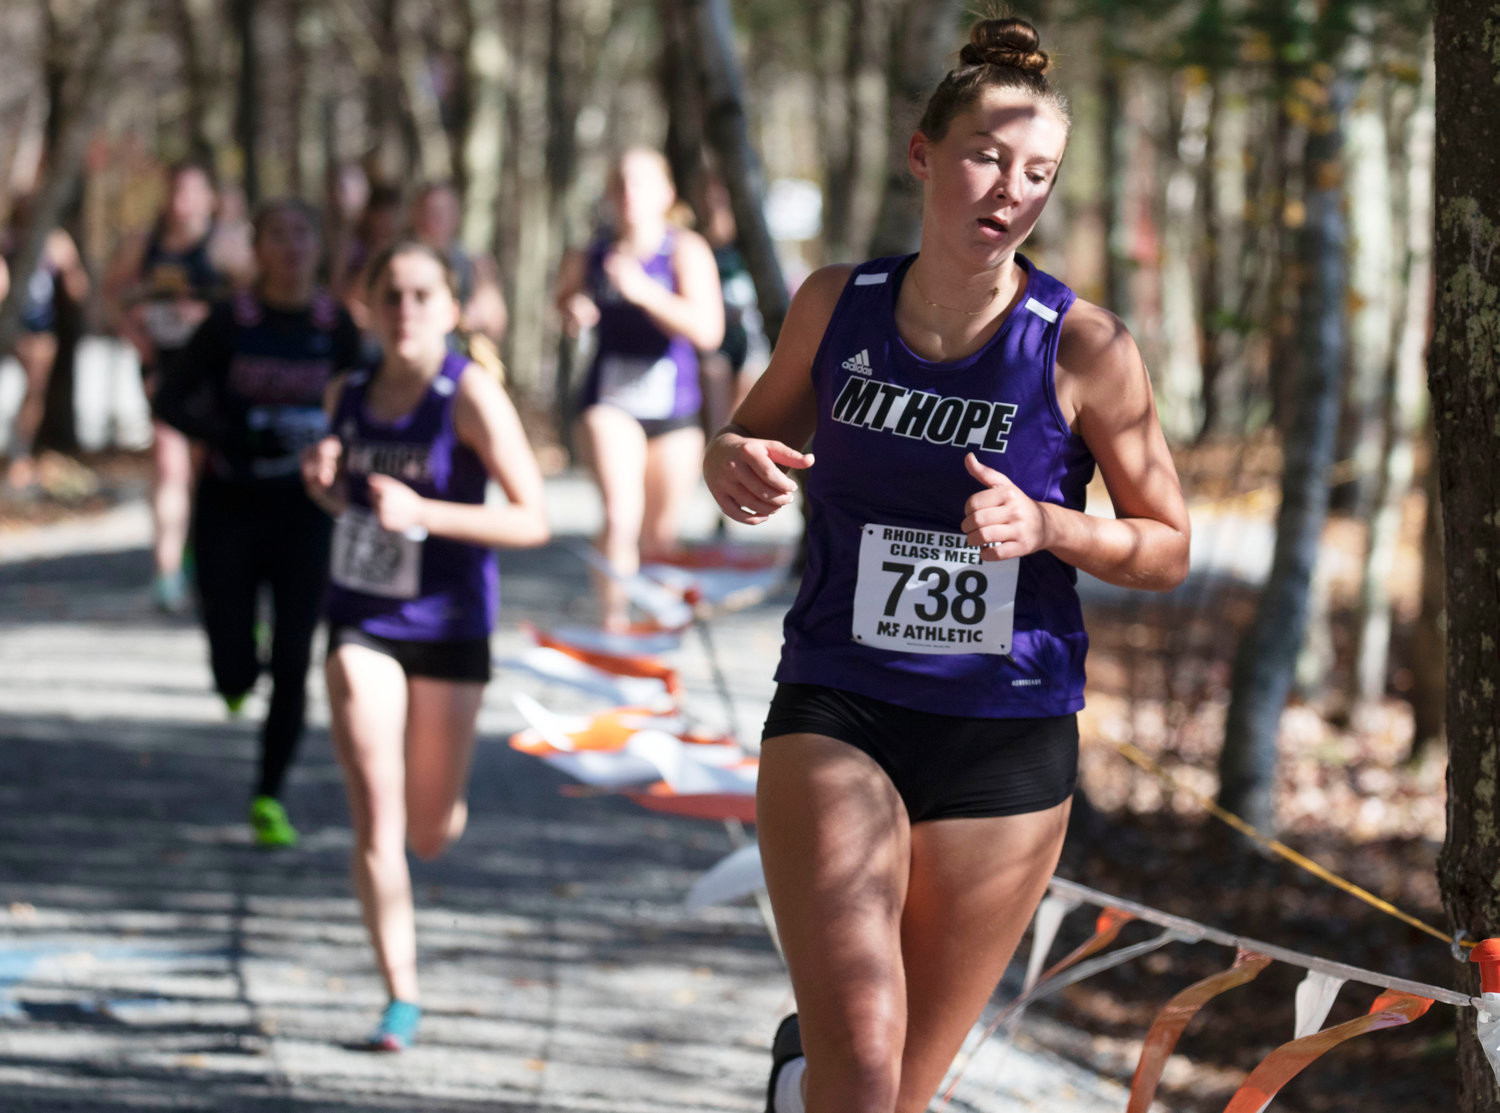 Senior Reyn Ferris runs through the wooded part of the course. She placed 28th with a time of 22:25.2.